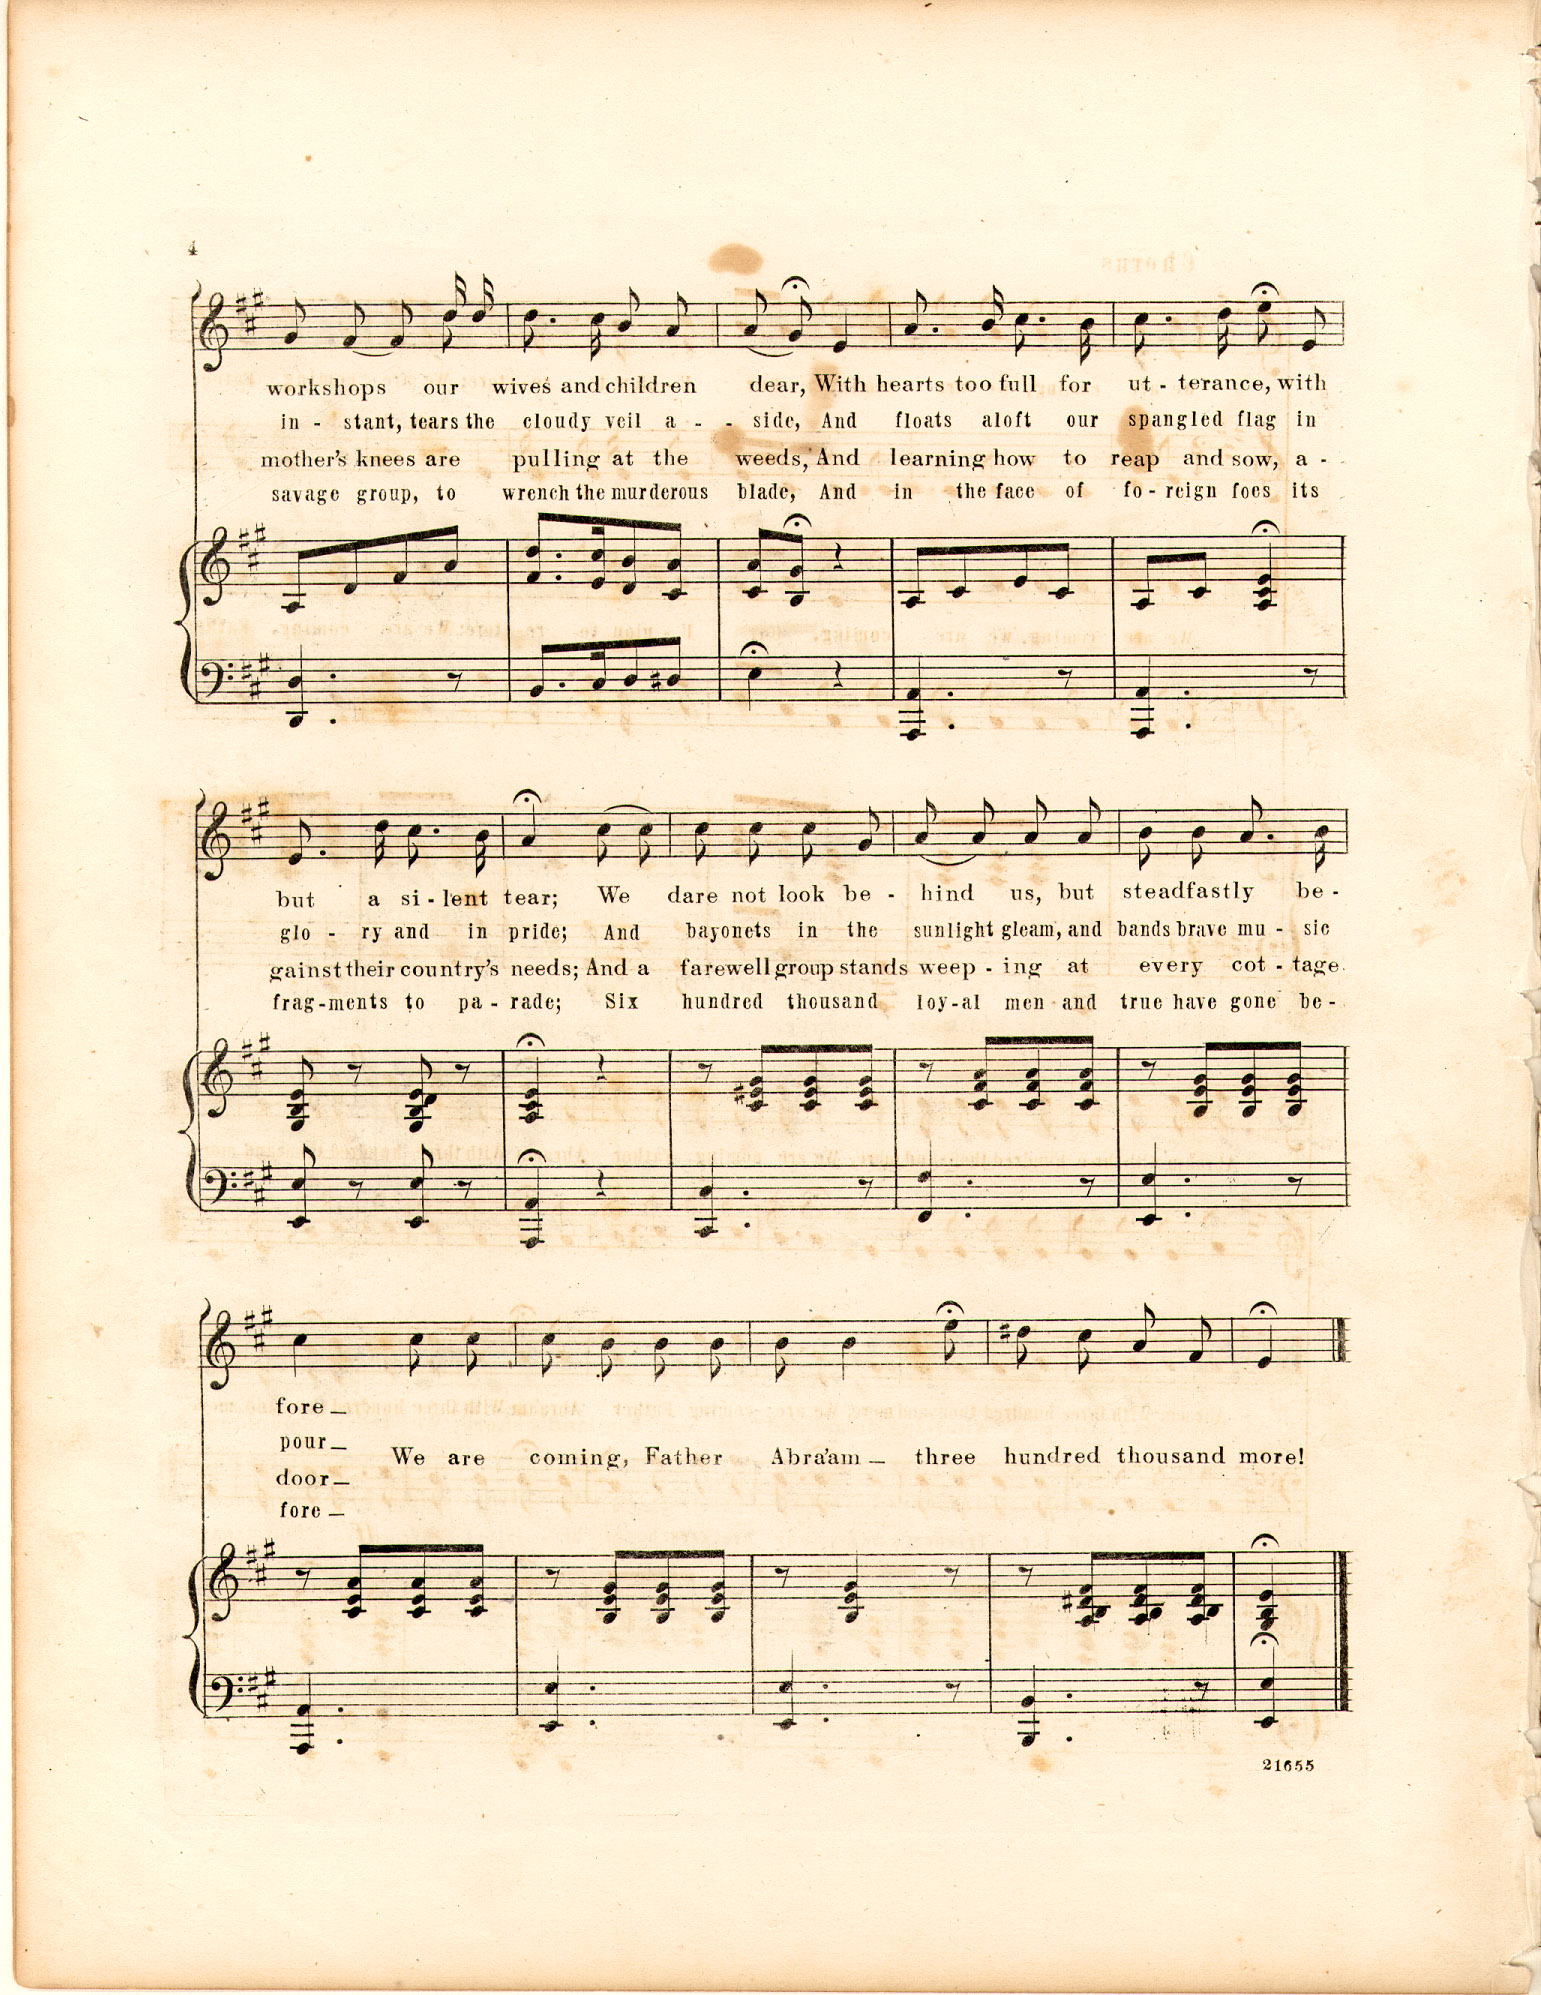 We are coming Father Abra'am 300.000 more [Historic American Sheet Music]